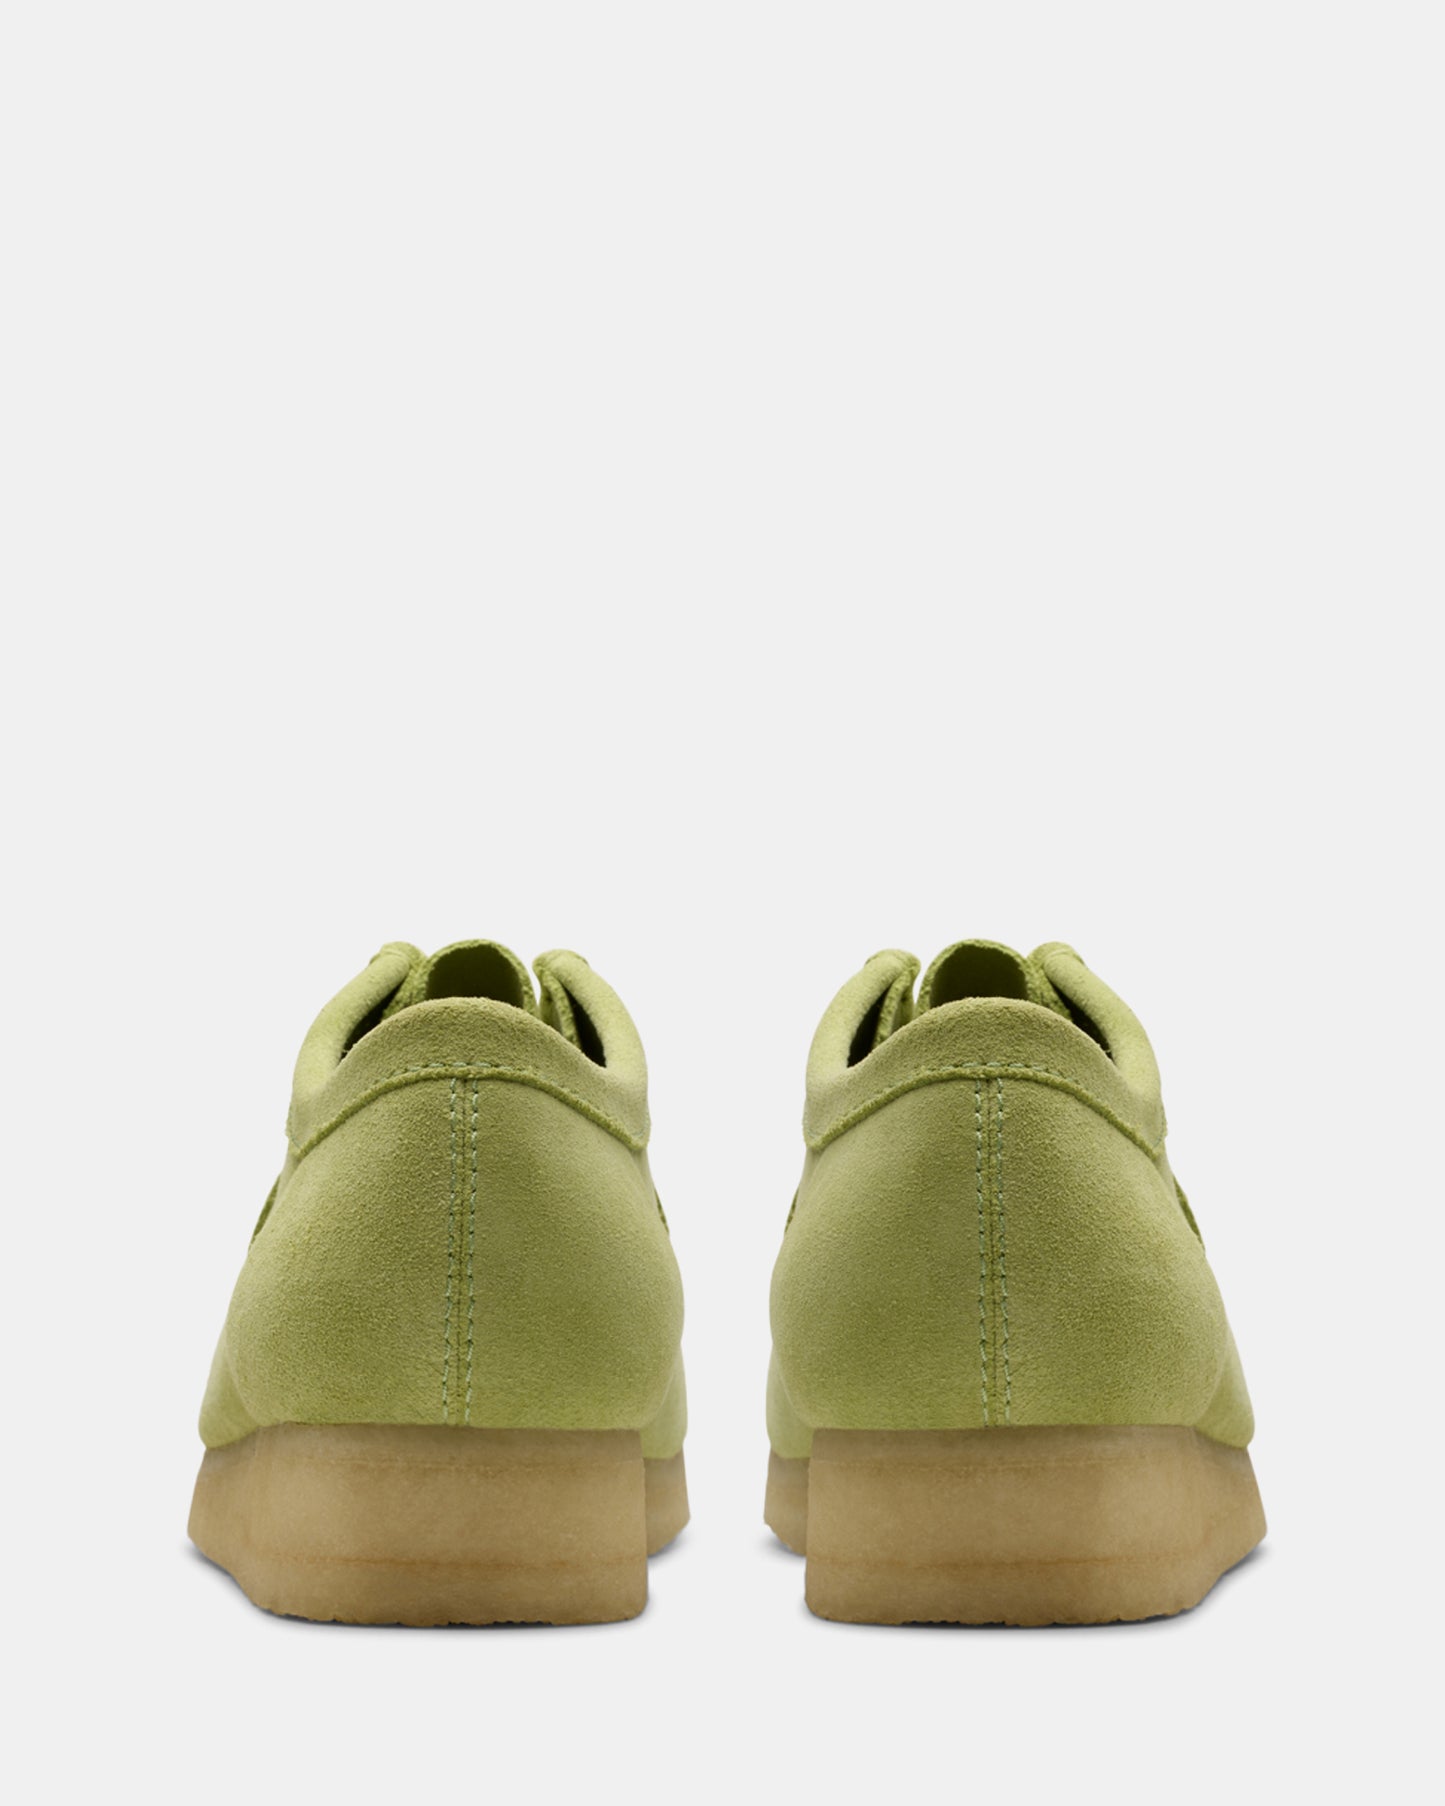 Wallabee (M) Pale Lime Suede